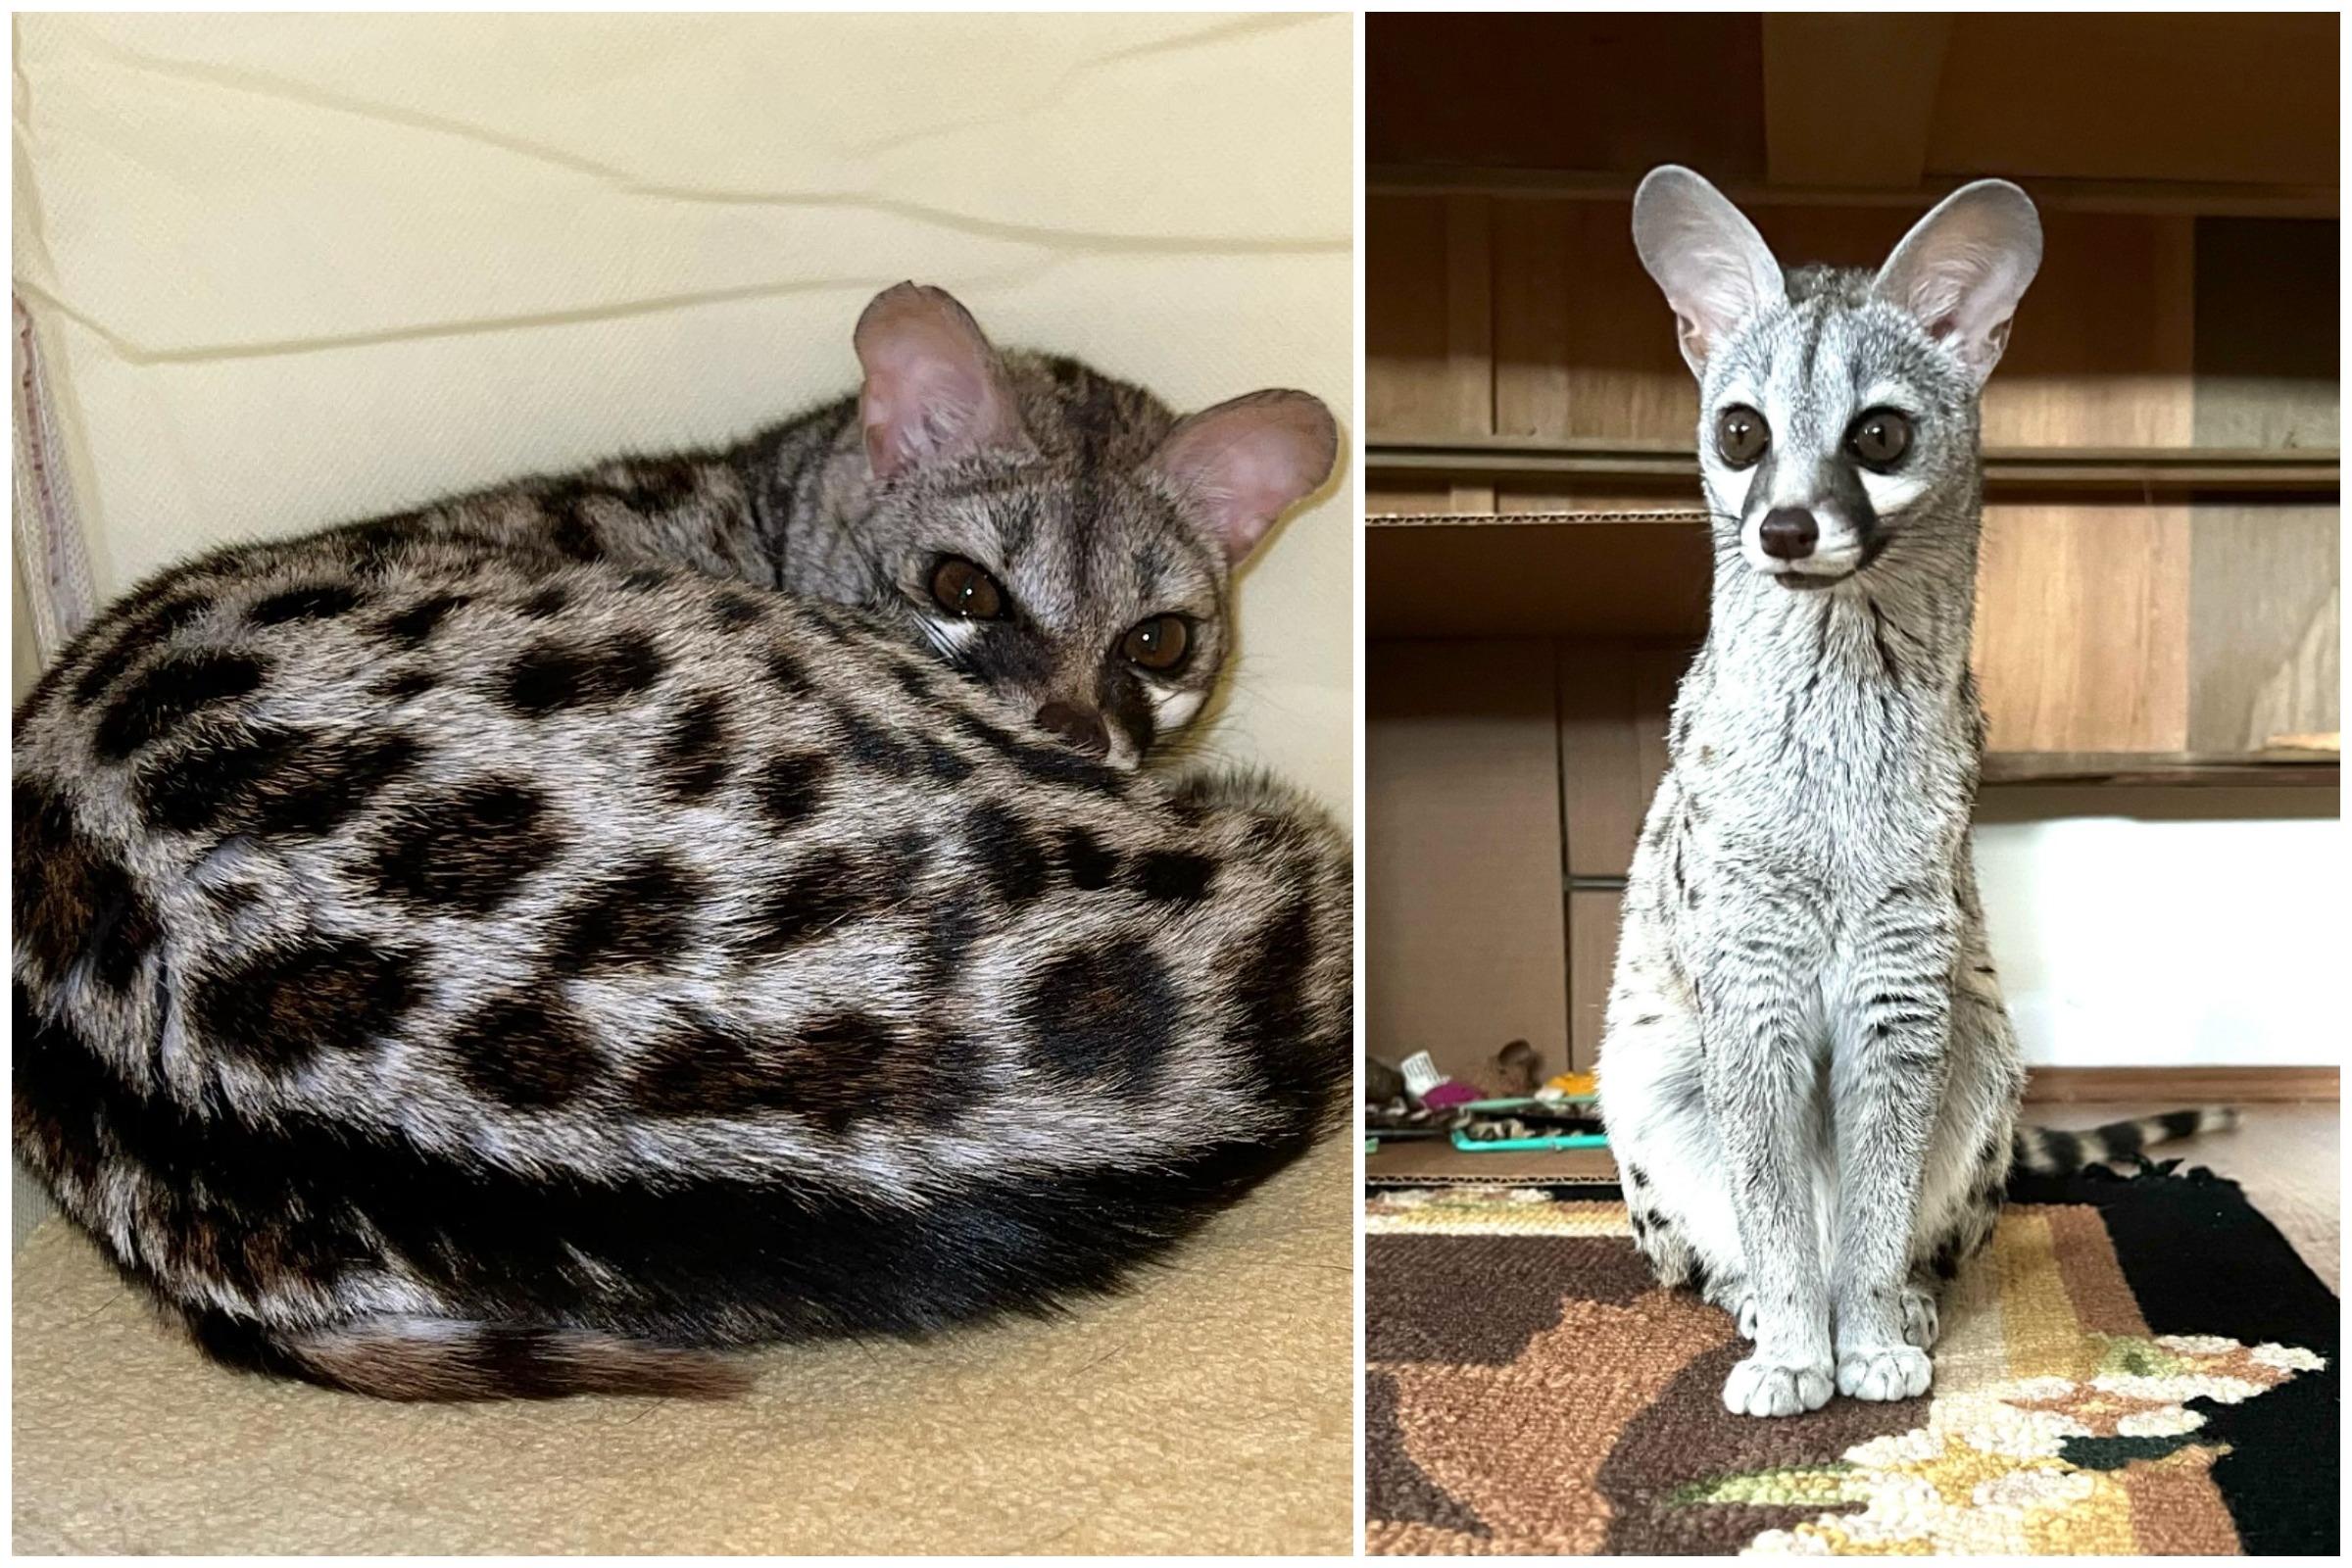 Bizarre Cat-like Creature Baffles the Internet As No One Knows Its Species